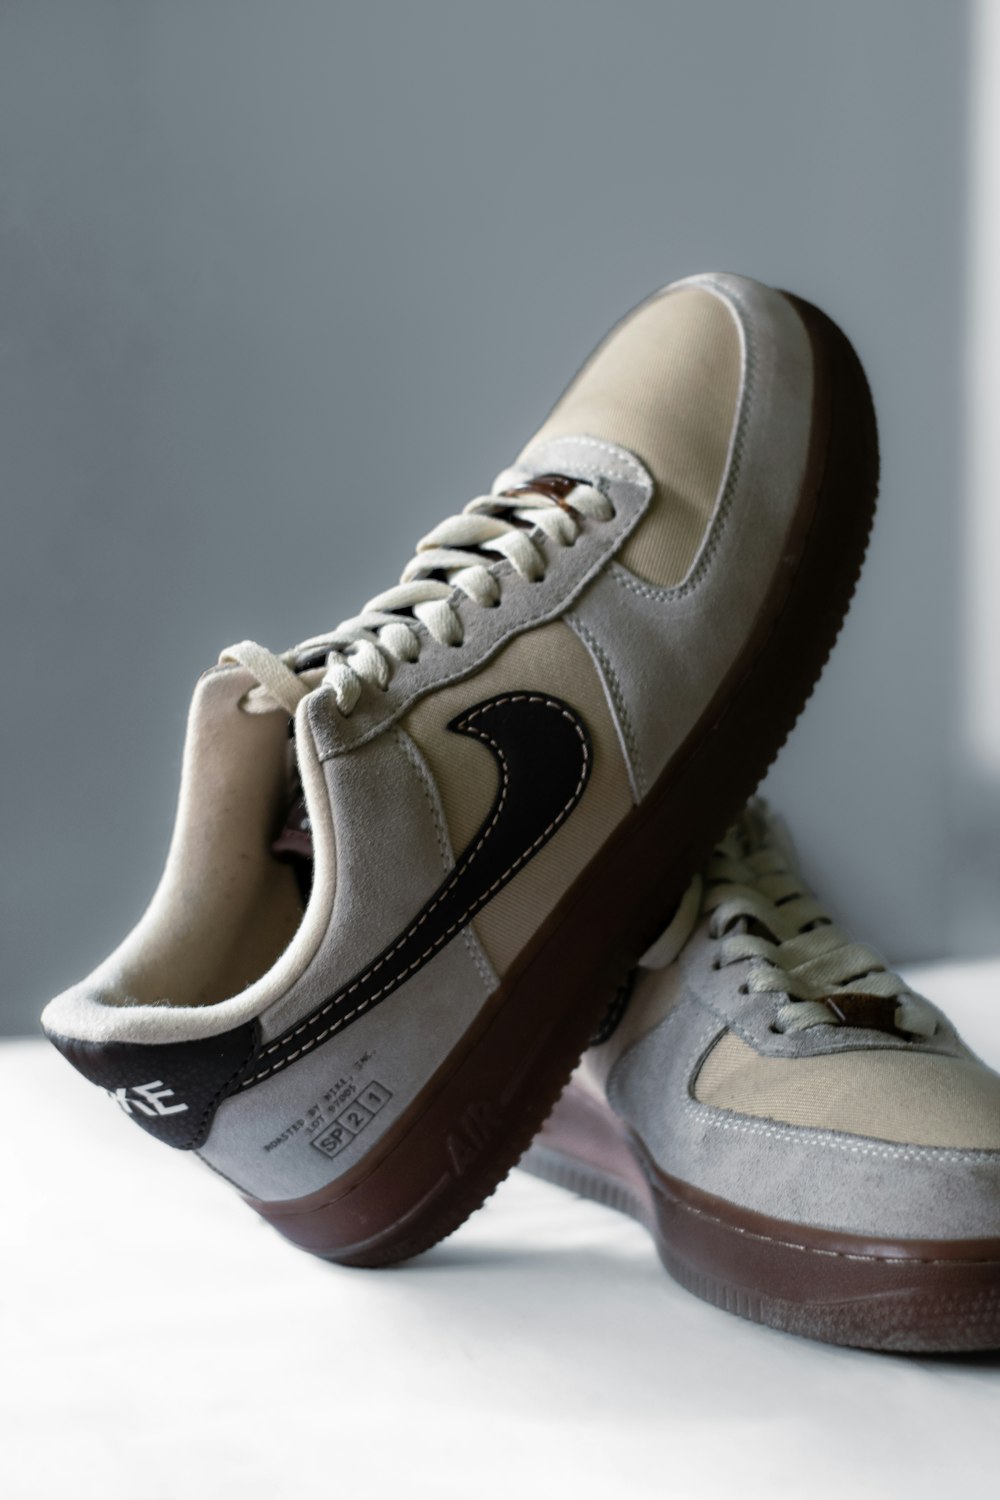 a pair of sneakers with a brown sole